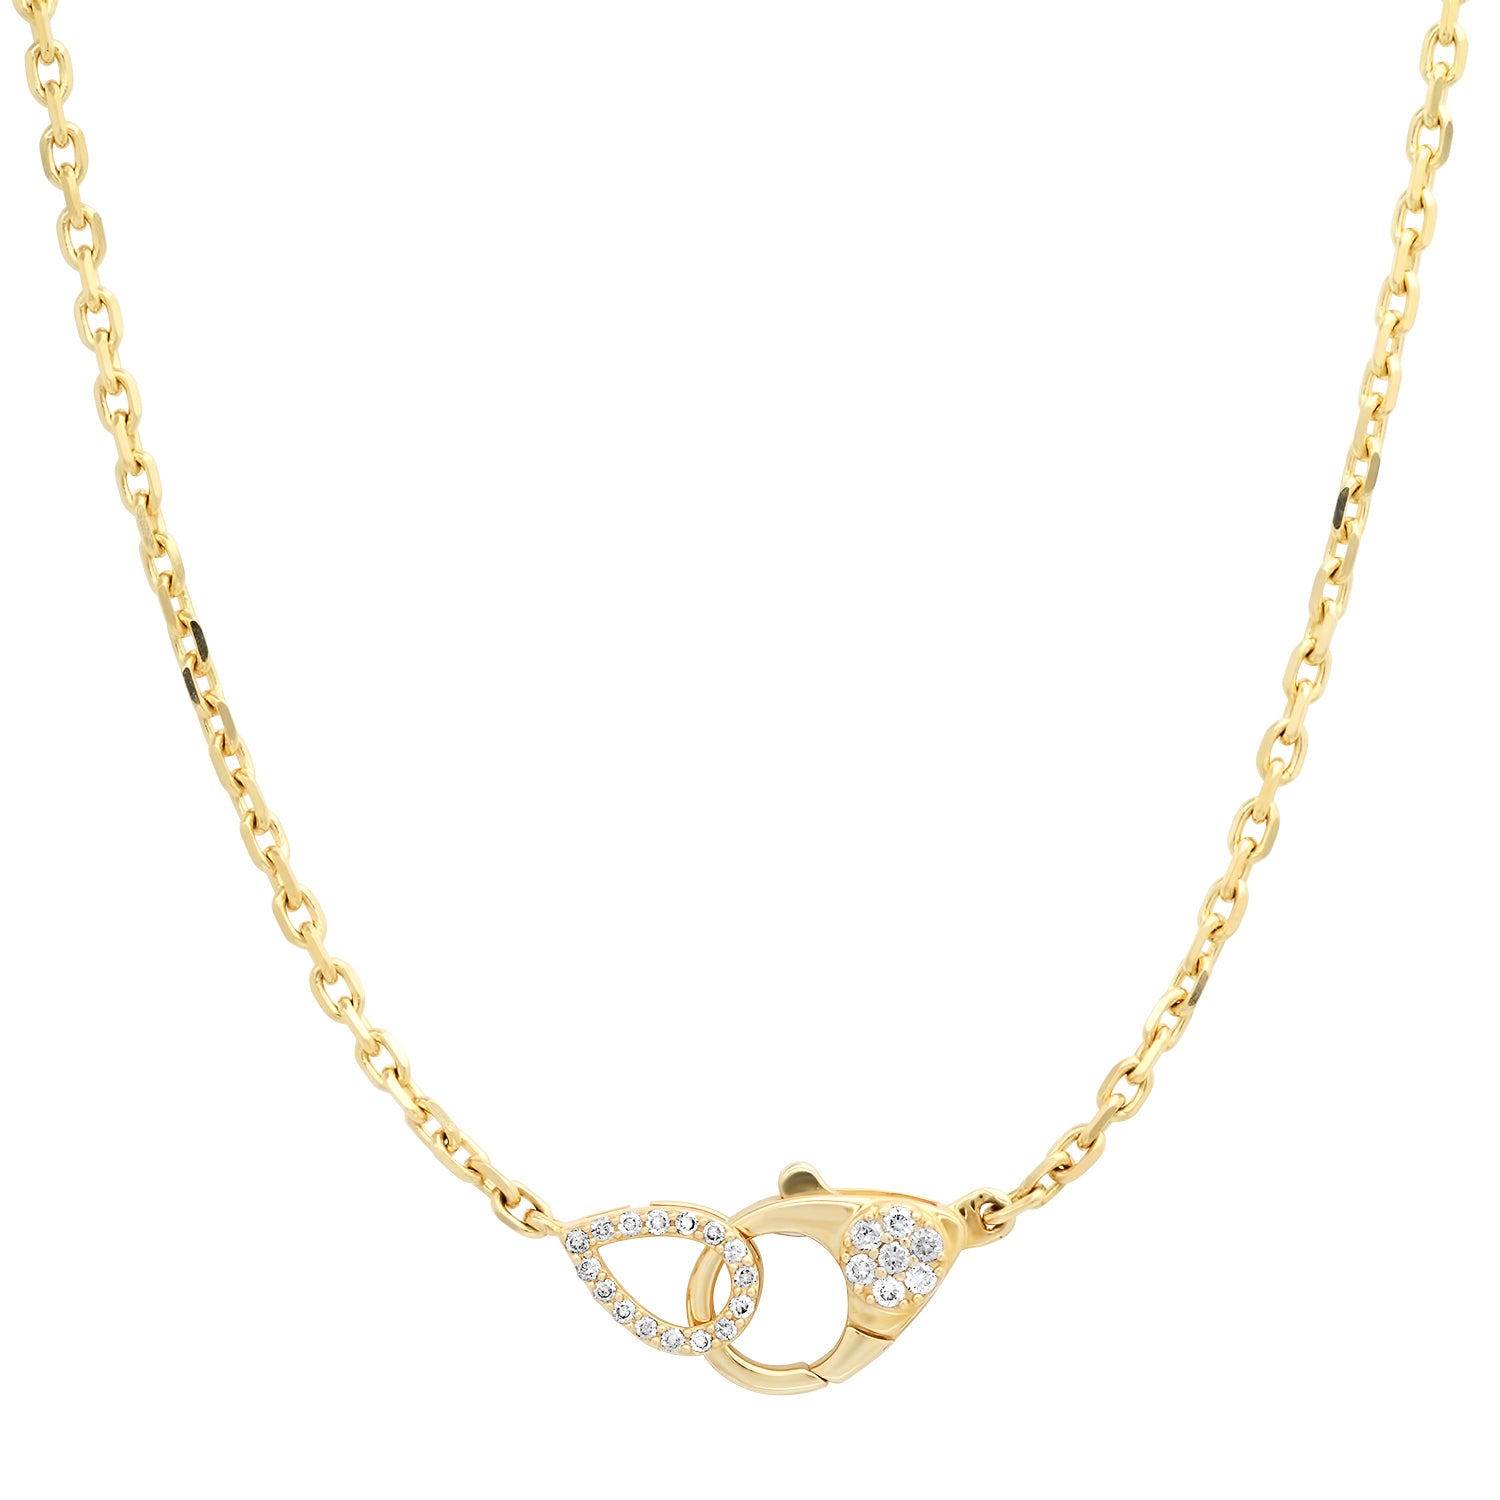 Hooked On You Diamond Clasp Chain Necklace